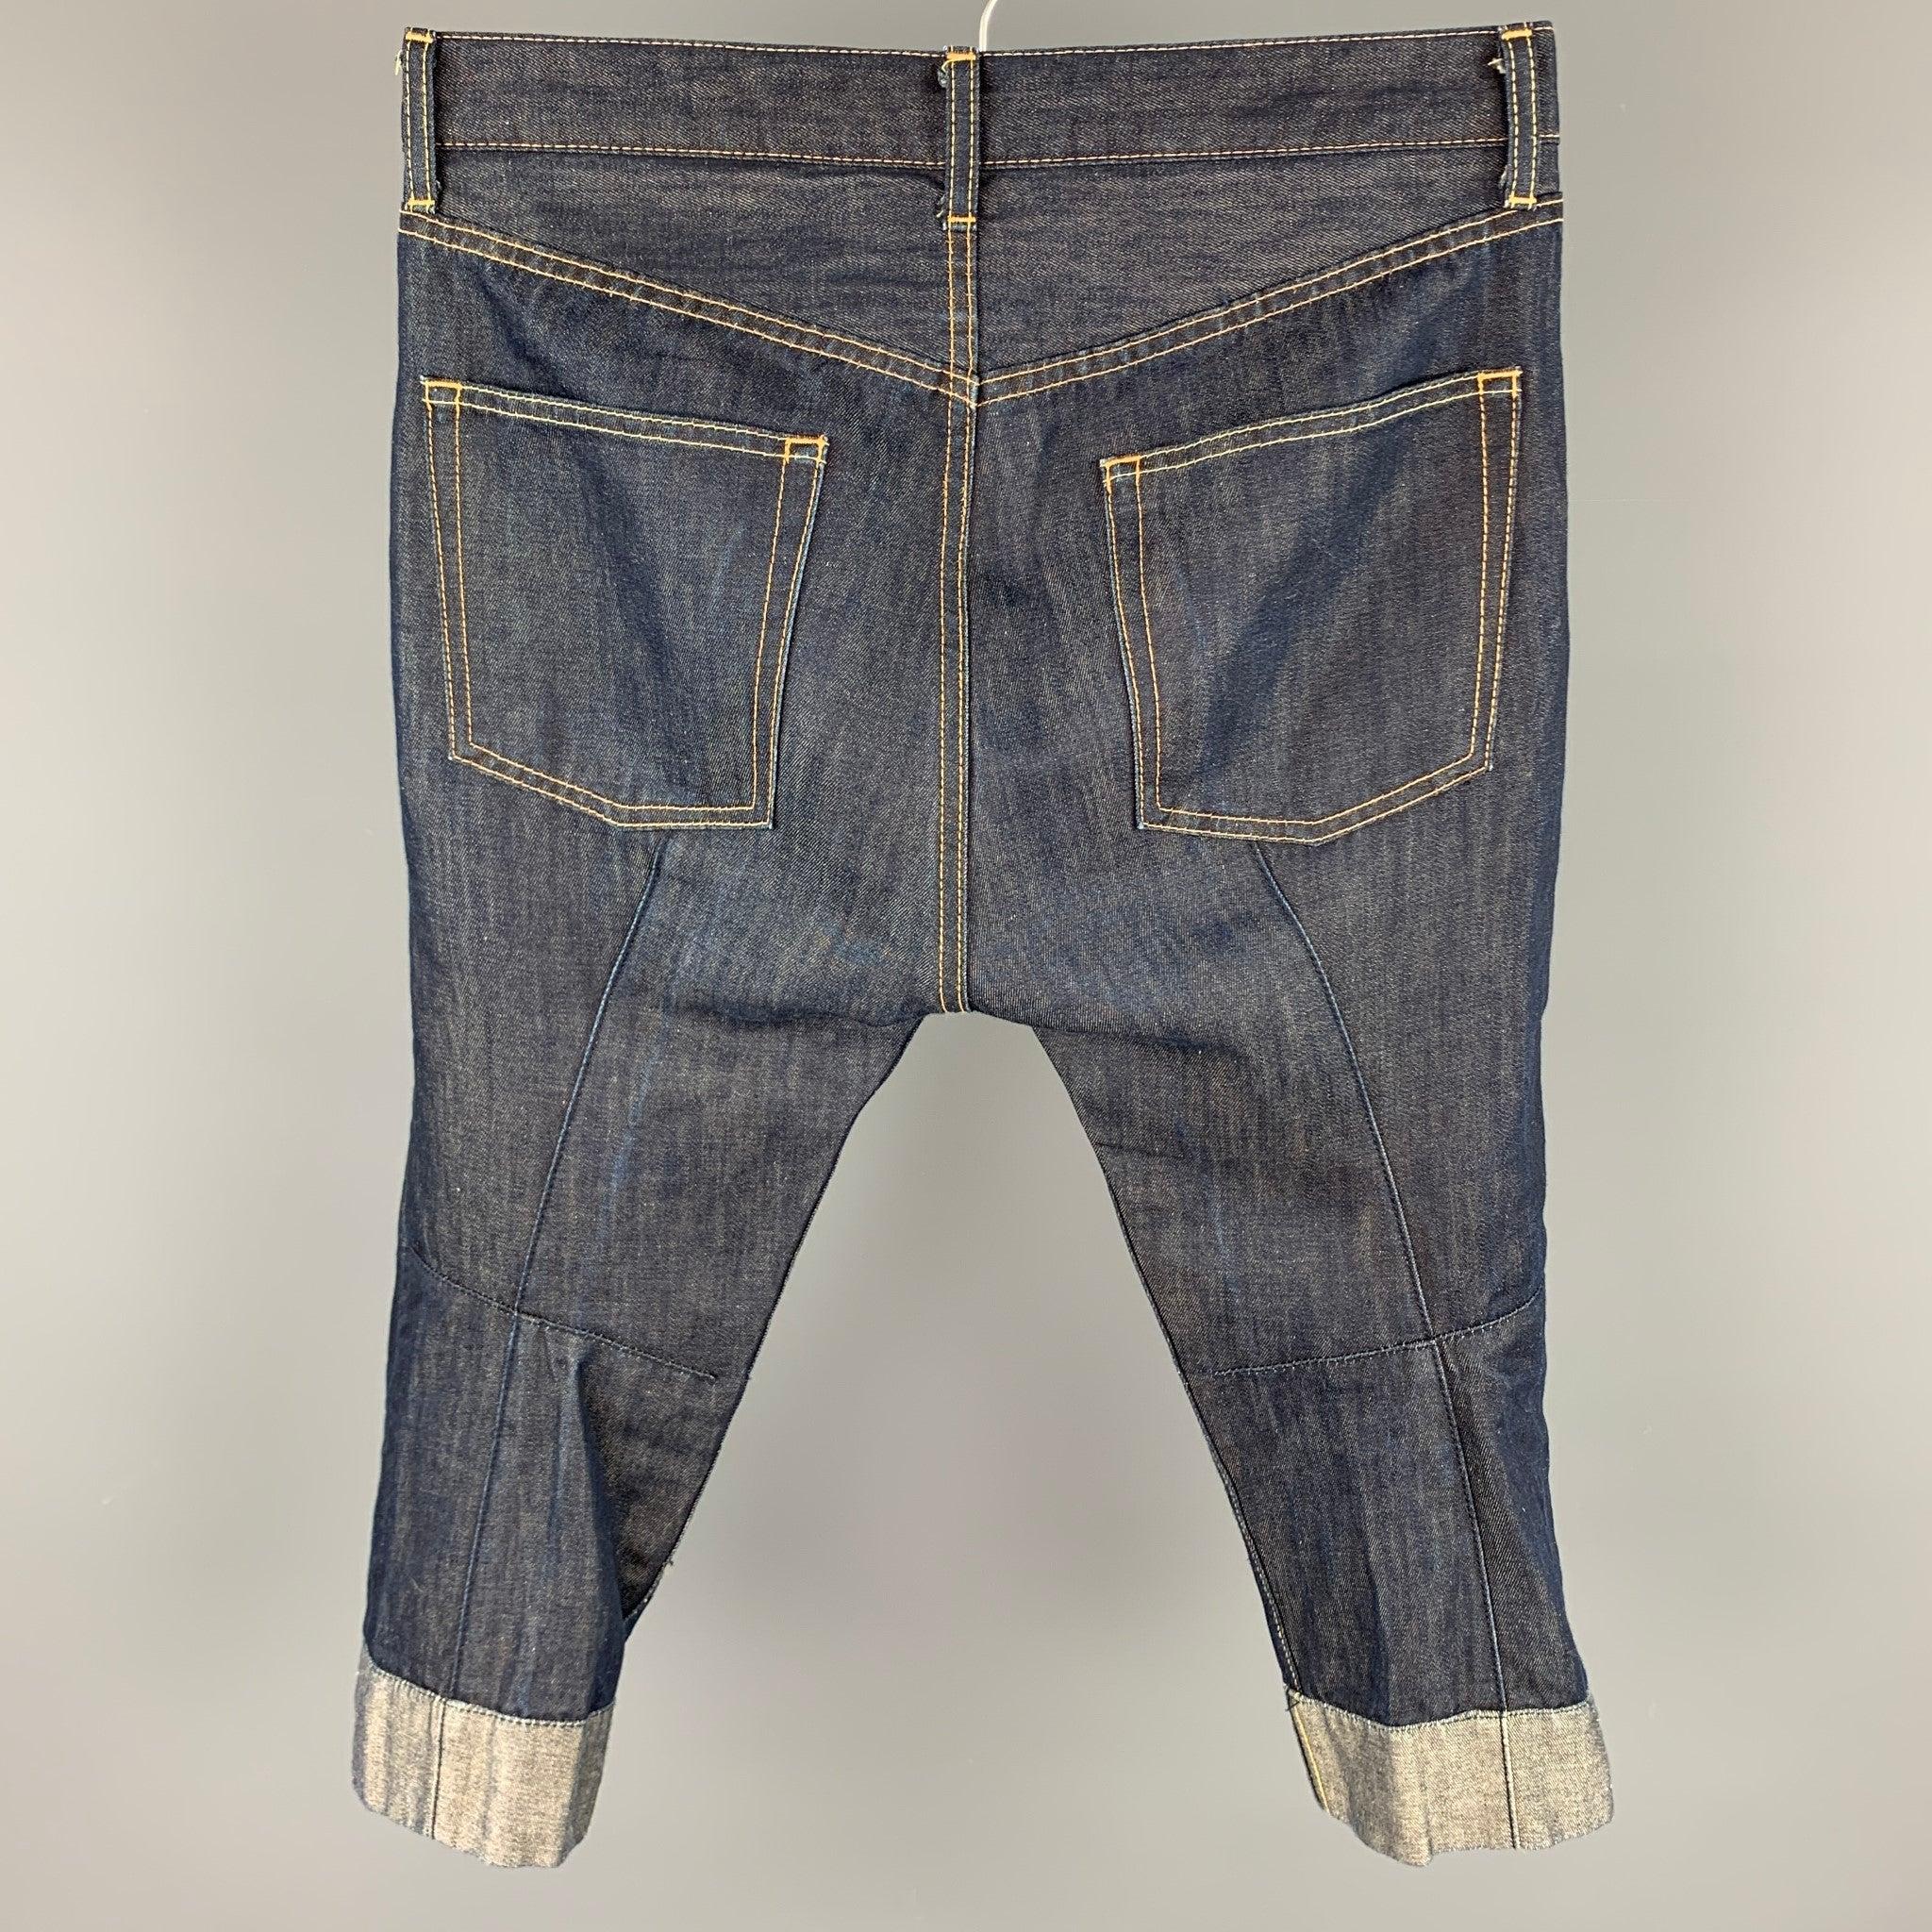 JUNYA WATANABE jeans comes in a indigo denim with contrast stitching featuring a cropped leg, folded, top stitching, and a zip fly closure. Made in Japan.
Very Good
Pre-Owned Condition. 

Marked:   SS / AD2008 

Measurements: 
  Waist: 32 inches 